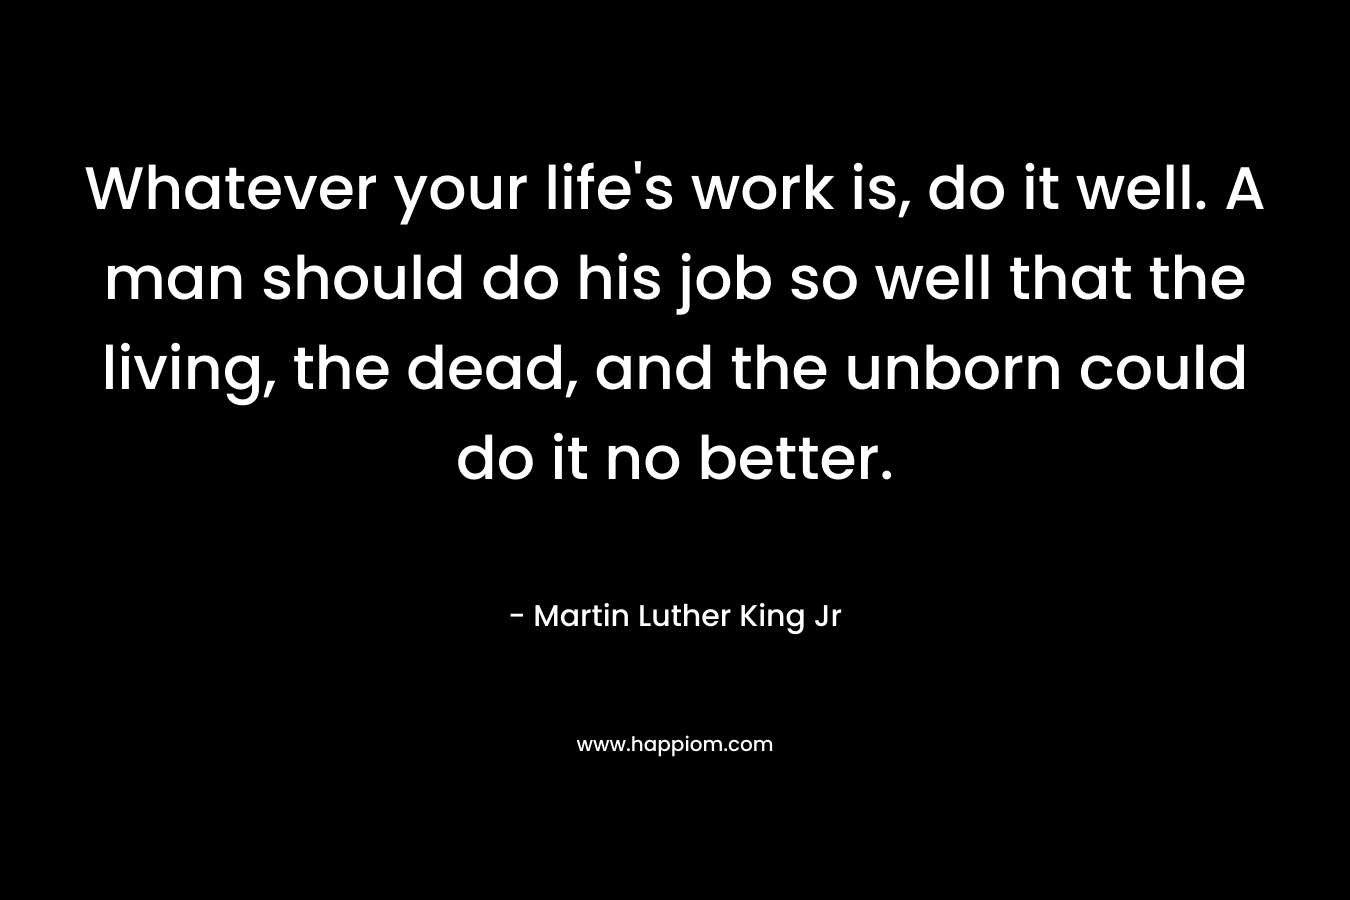 Whatever your life’s work is, do it well. A man should do his job so well that the living, the dead, and the unborn could do it no better. – Martin Luther King Jr